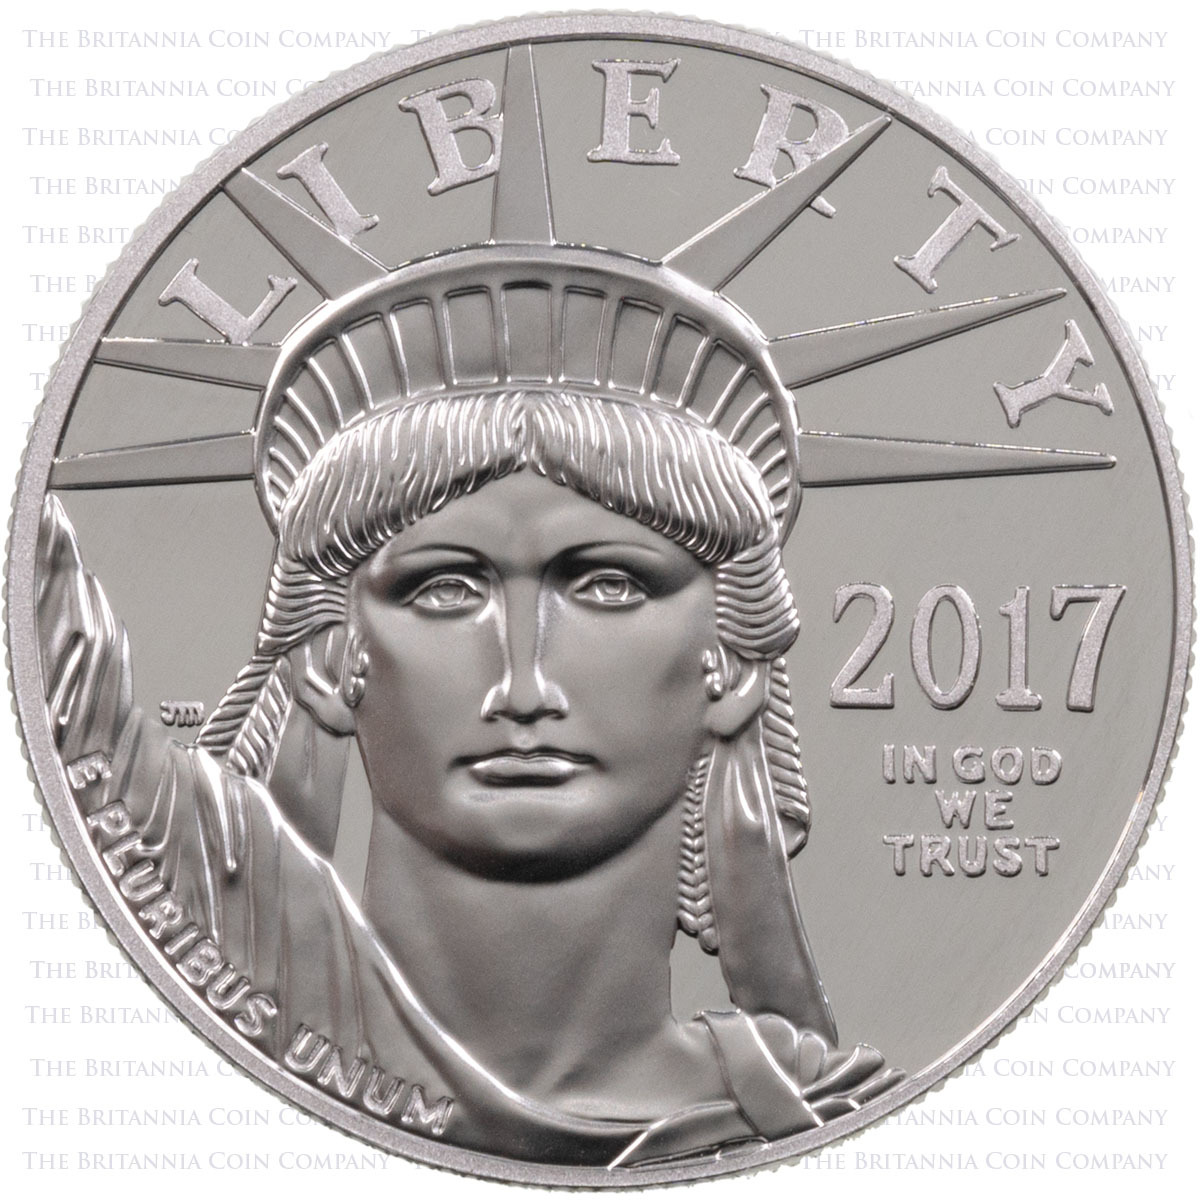 17EJ 2017 United States American Eagle One Ounce Platinum Proof Coin Obverse